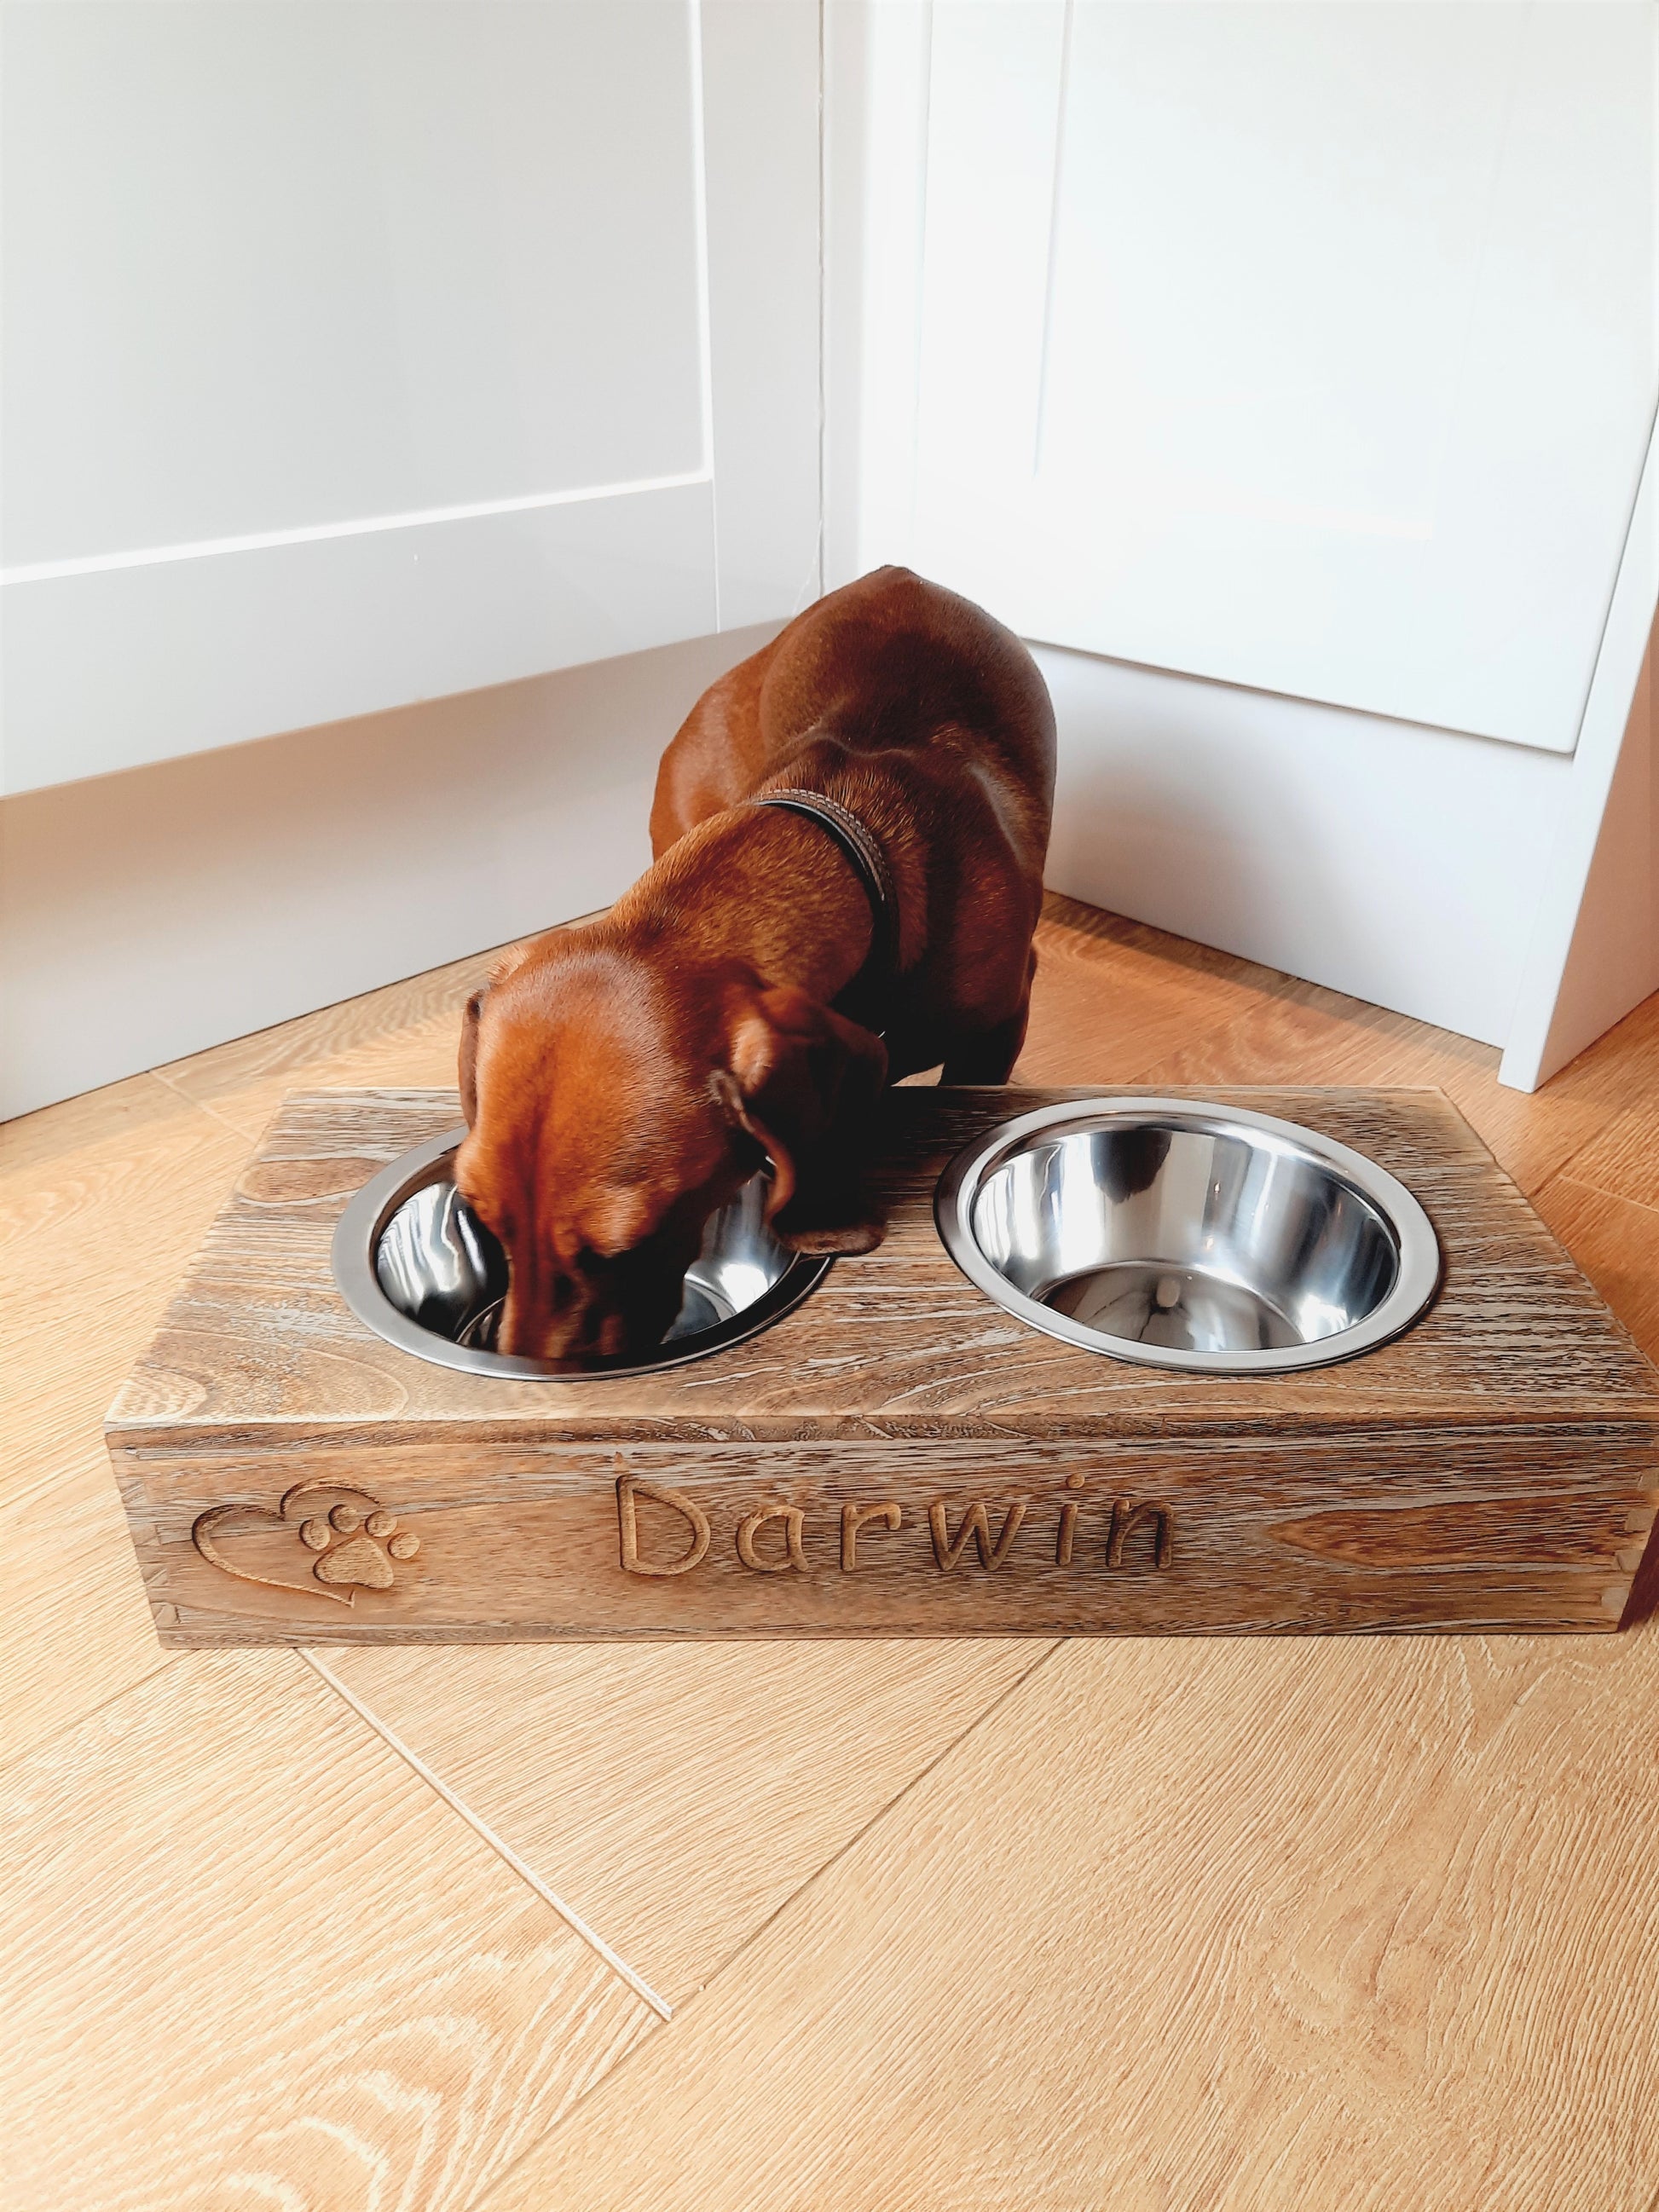 A brown dachsund is eating on the Personalised Pet Bowl Feeder Bamboo Wood that has paw with heart icon and engraved pet's name "Darwin".